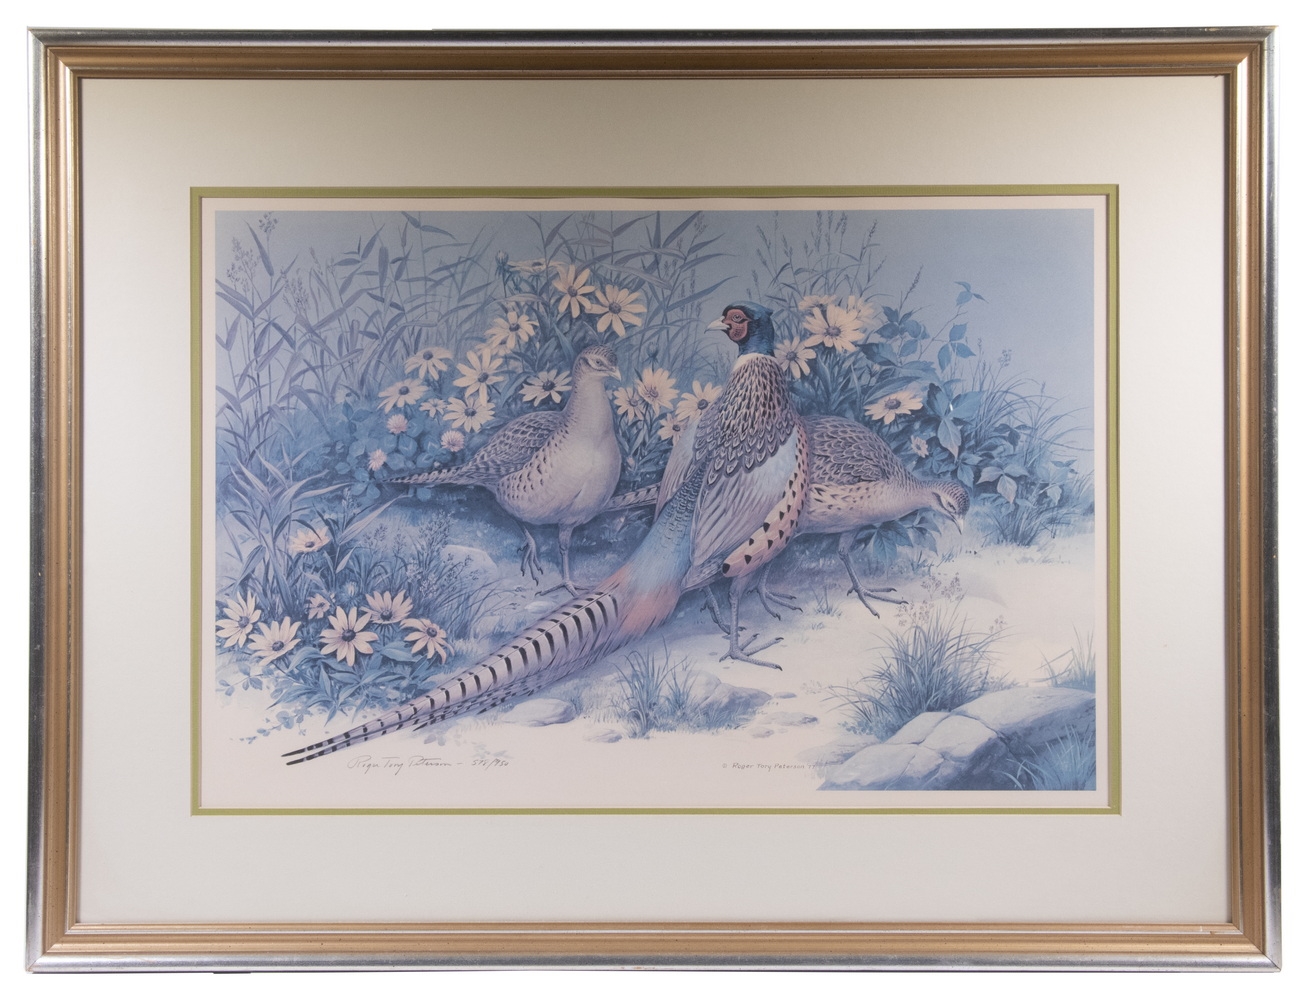 "Pheasants" by Roger Tory Peterson, dated 1977